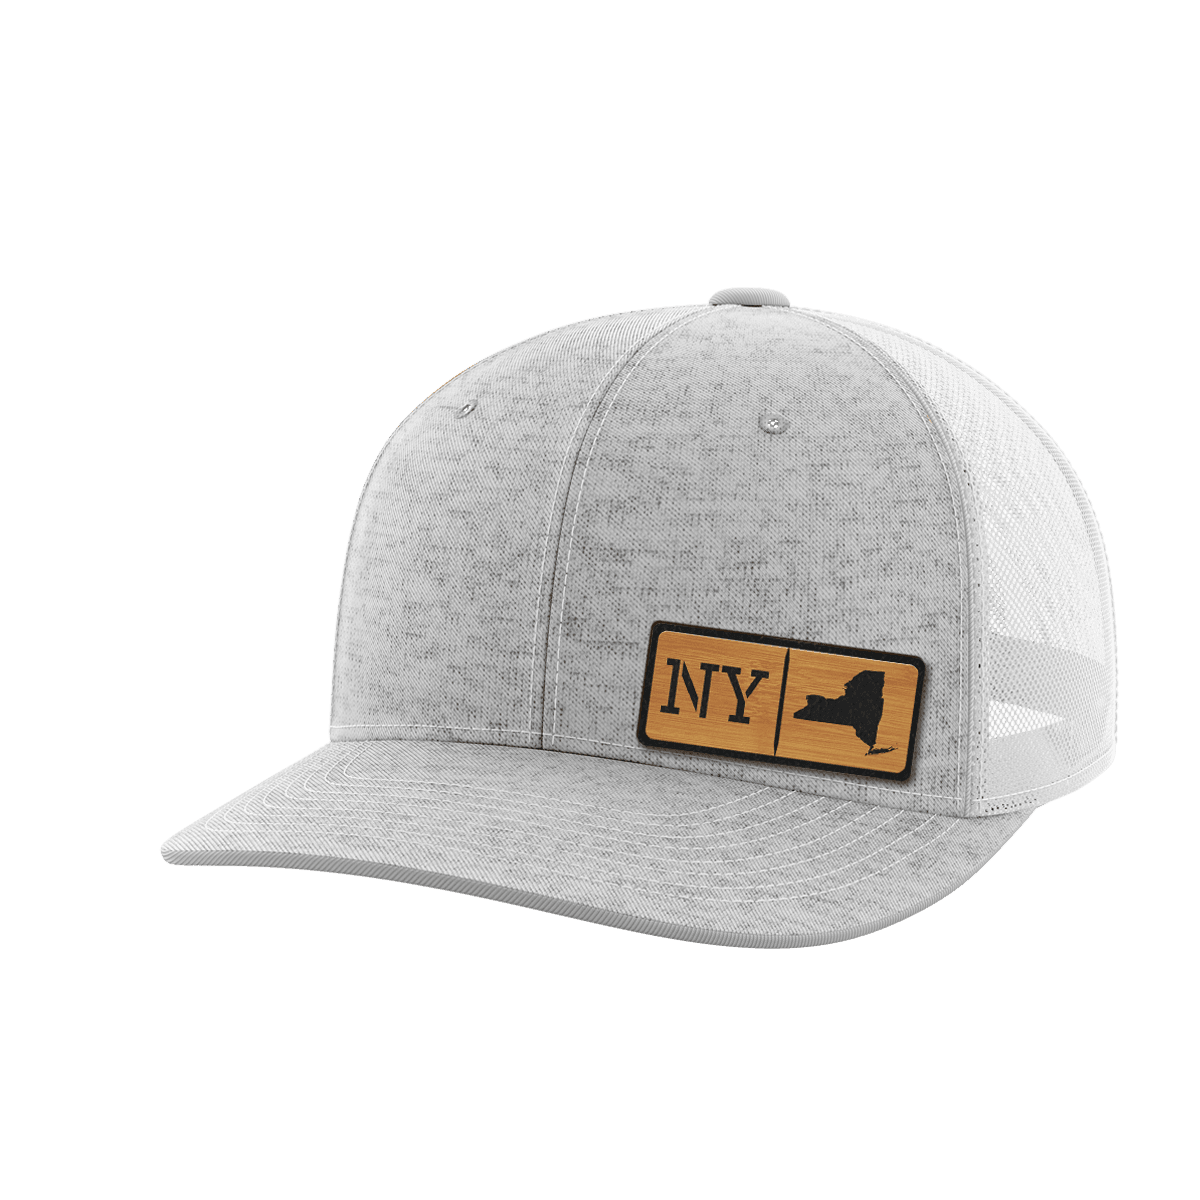 New York Homegrown Hats - Greater Half